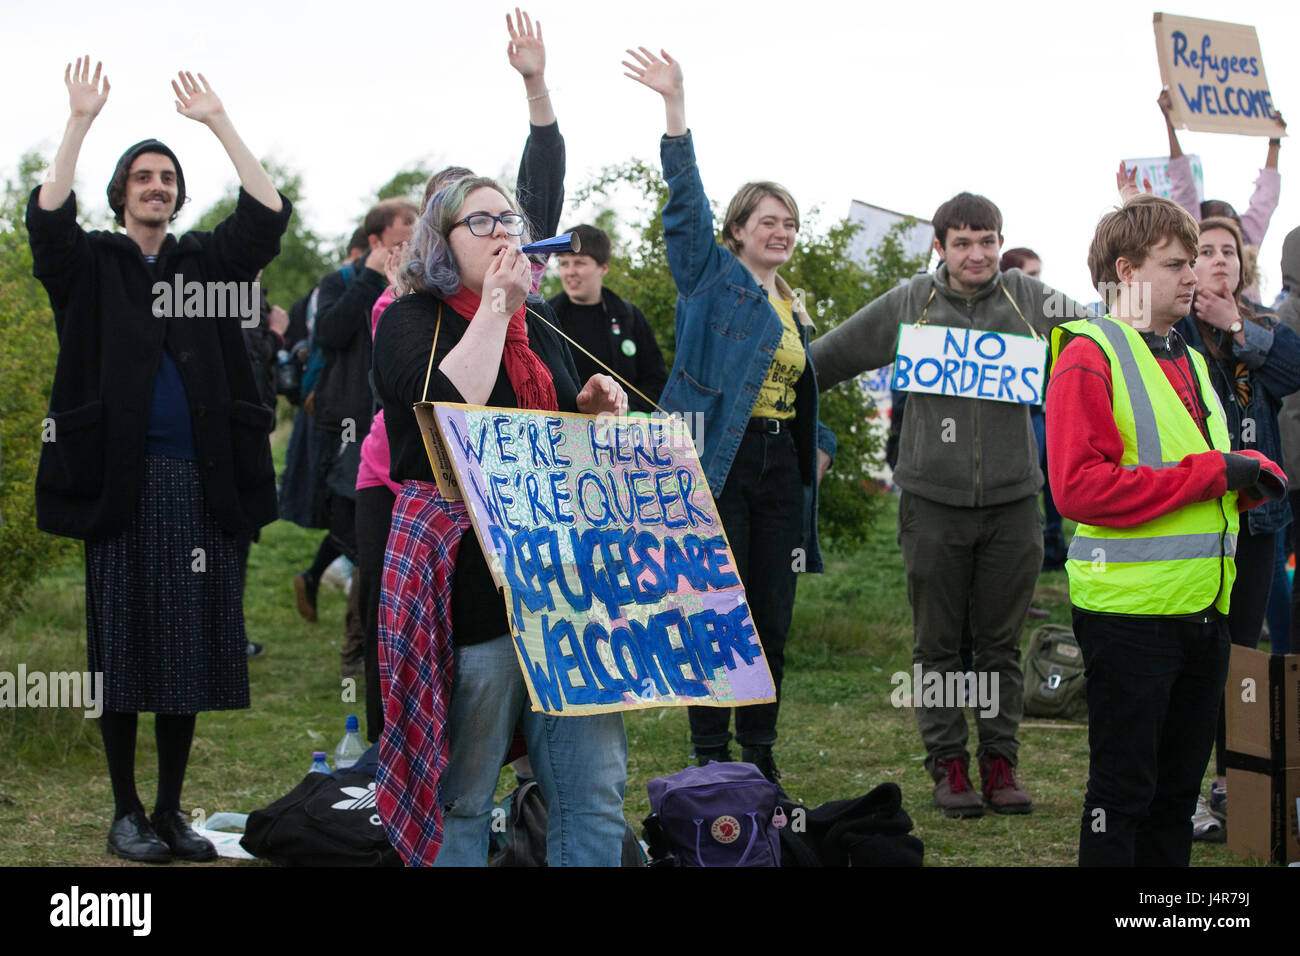 Milton Ernest, UK. 13th May, 2017. Campaigners against immigration detention communicate with detainees inside Yarl's Wood Immigration Removal Centre during a large protest organised by Movement For Justice By Any Means Necessary. Campaigners, including former detainees, called for all immigration detention centres to be closed. Credit: Mark Kerrison/Alamy Live News Stock Photo